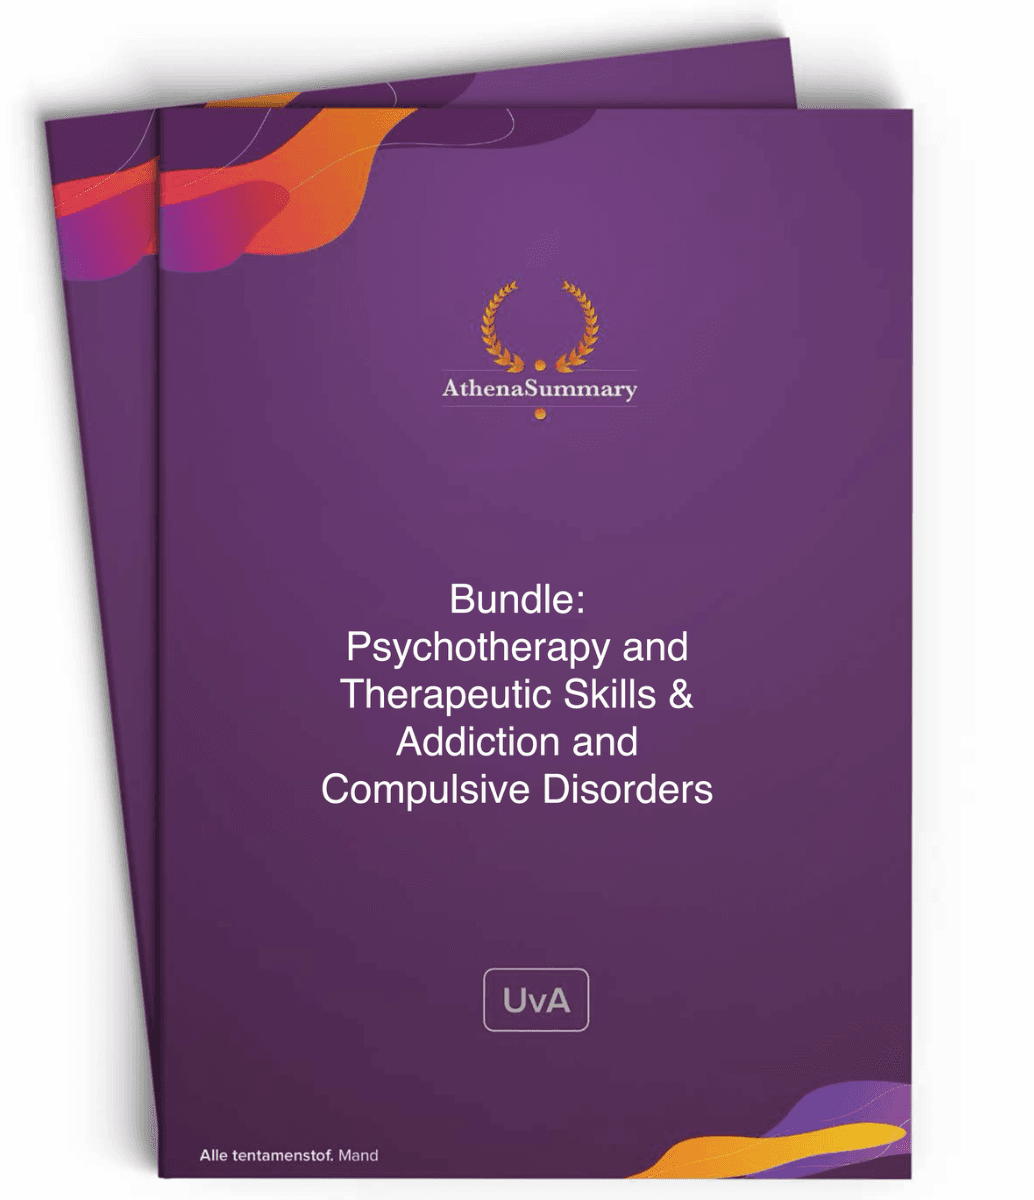 Bundle: Psychotherapy and Therapeutic Skills & Addiction and Compulsive Disorders